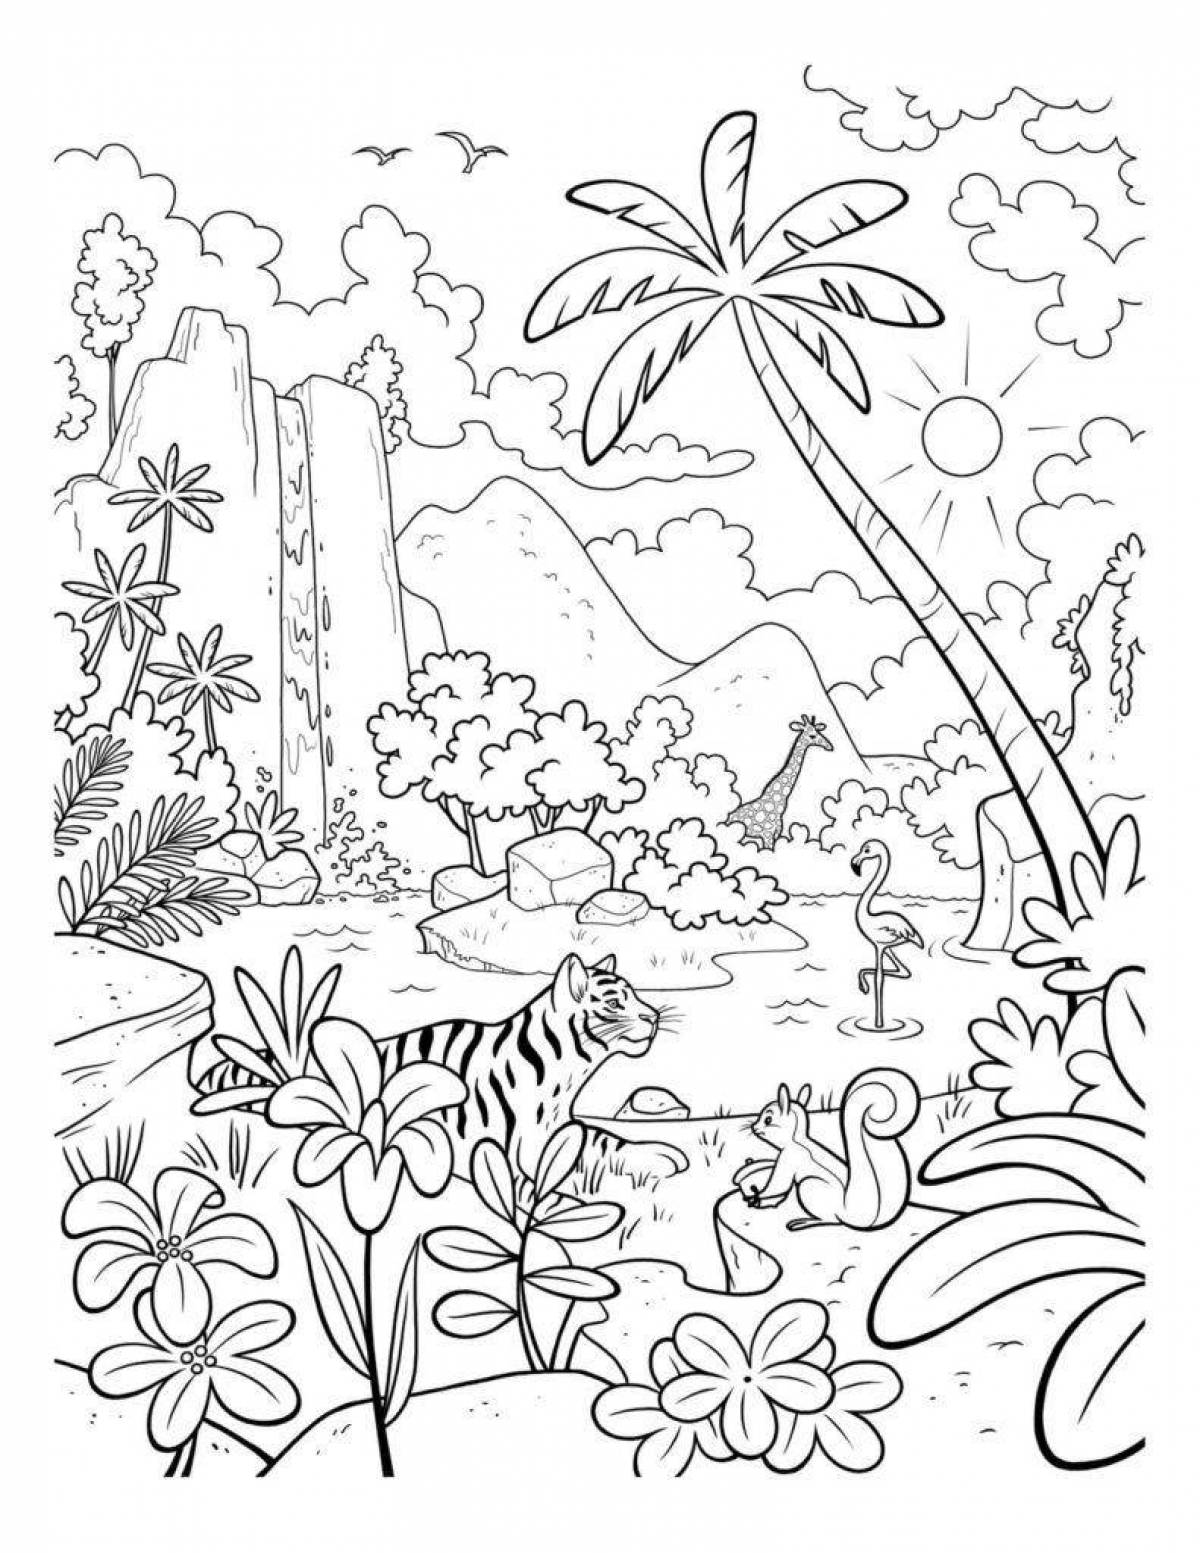 Coloring book inviting tropical forest